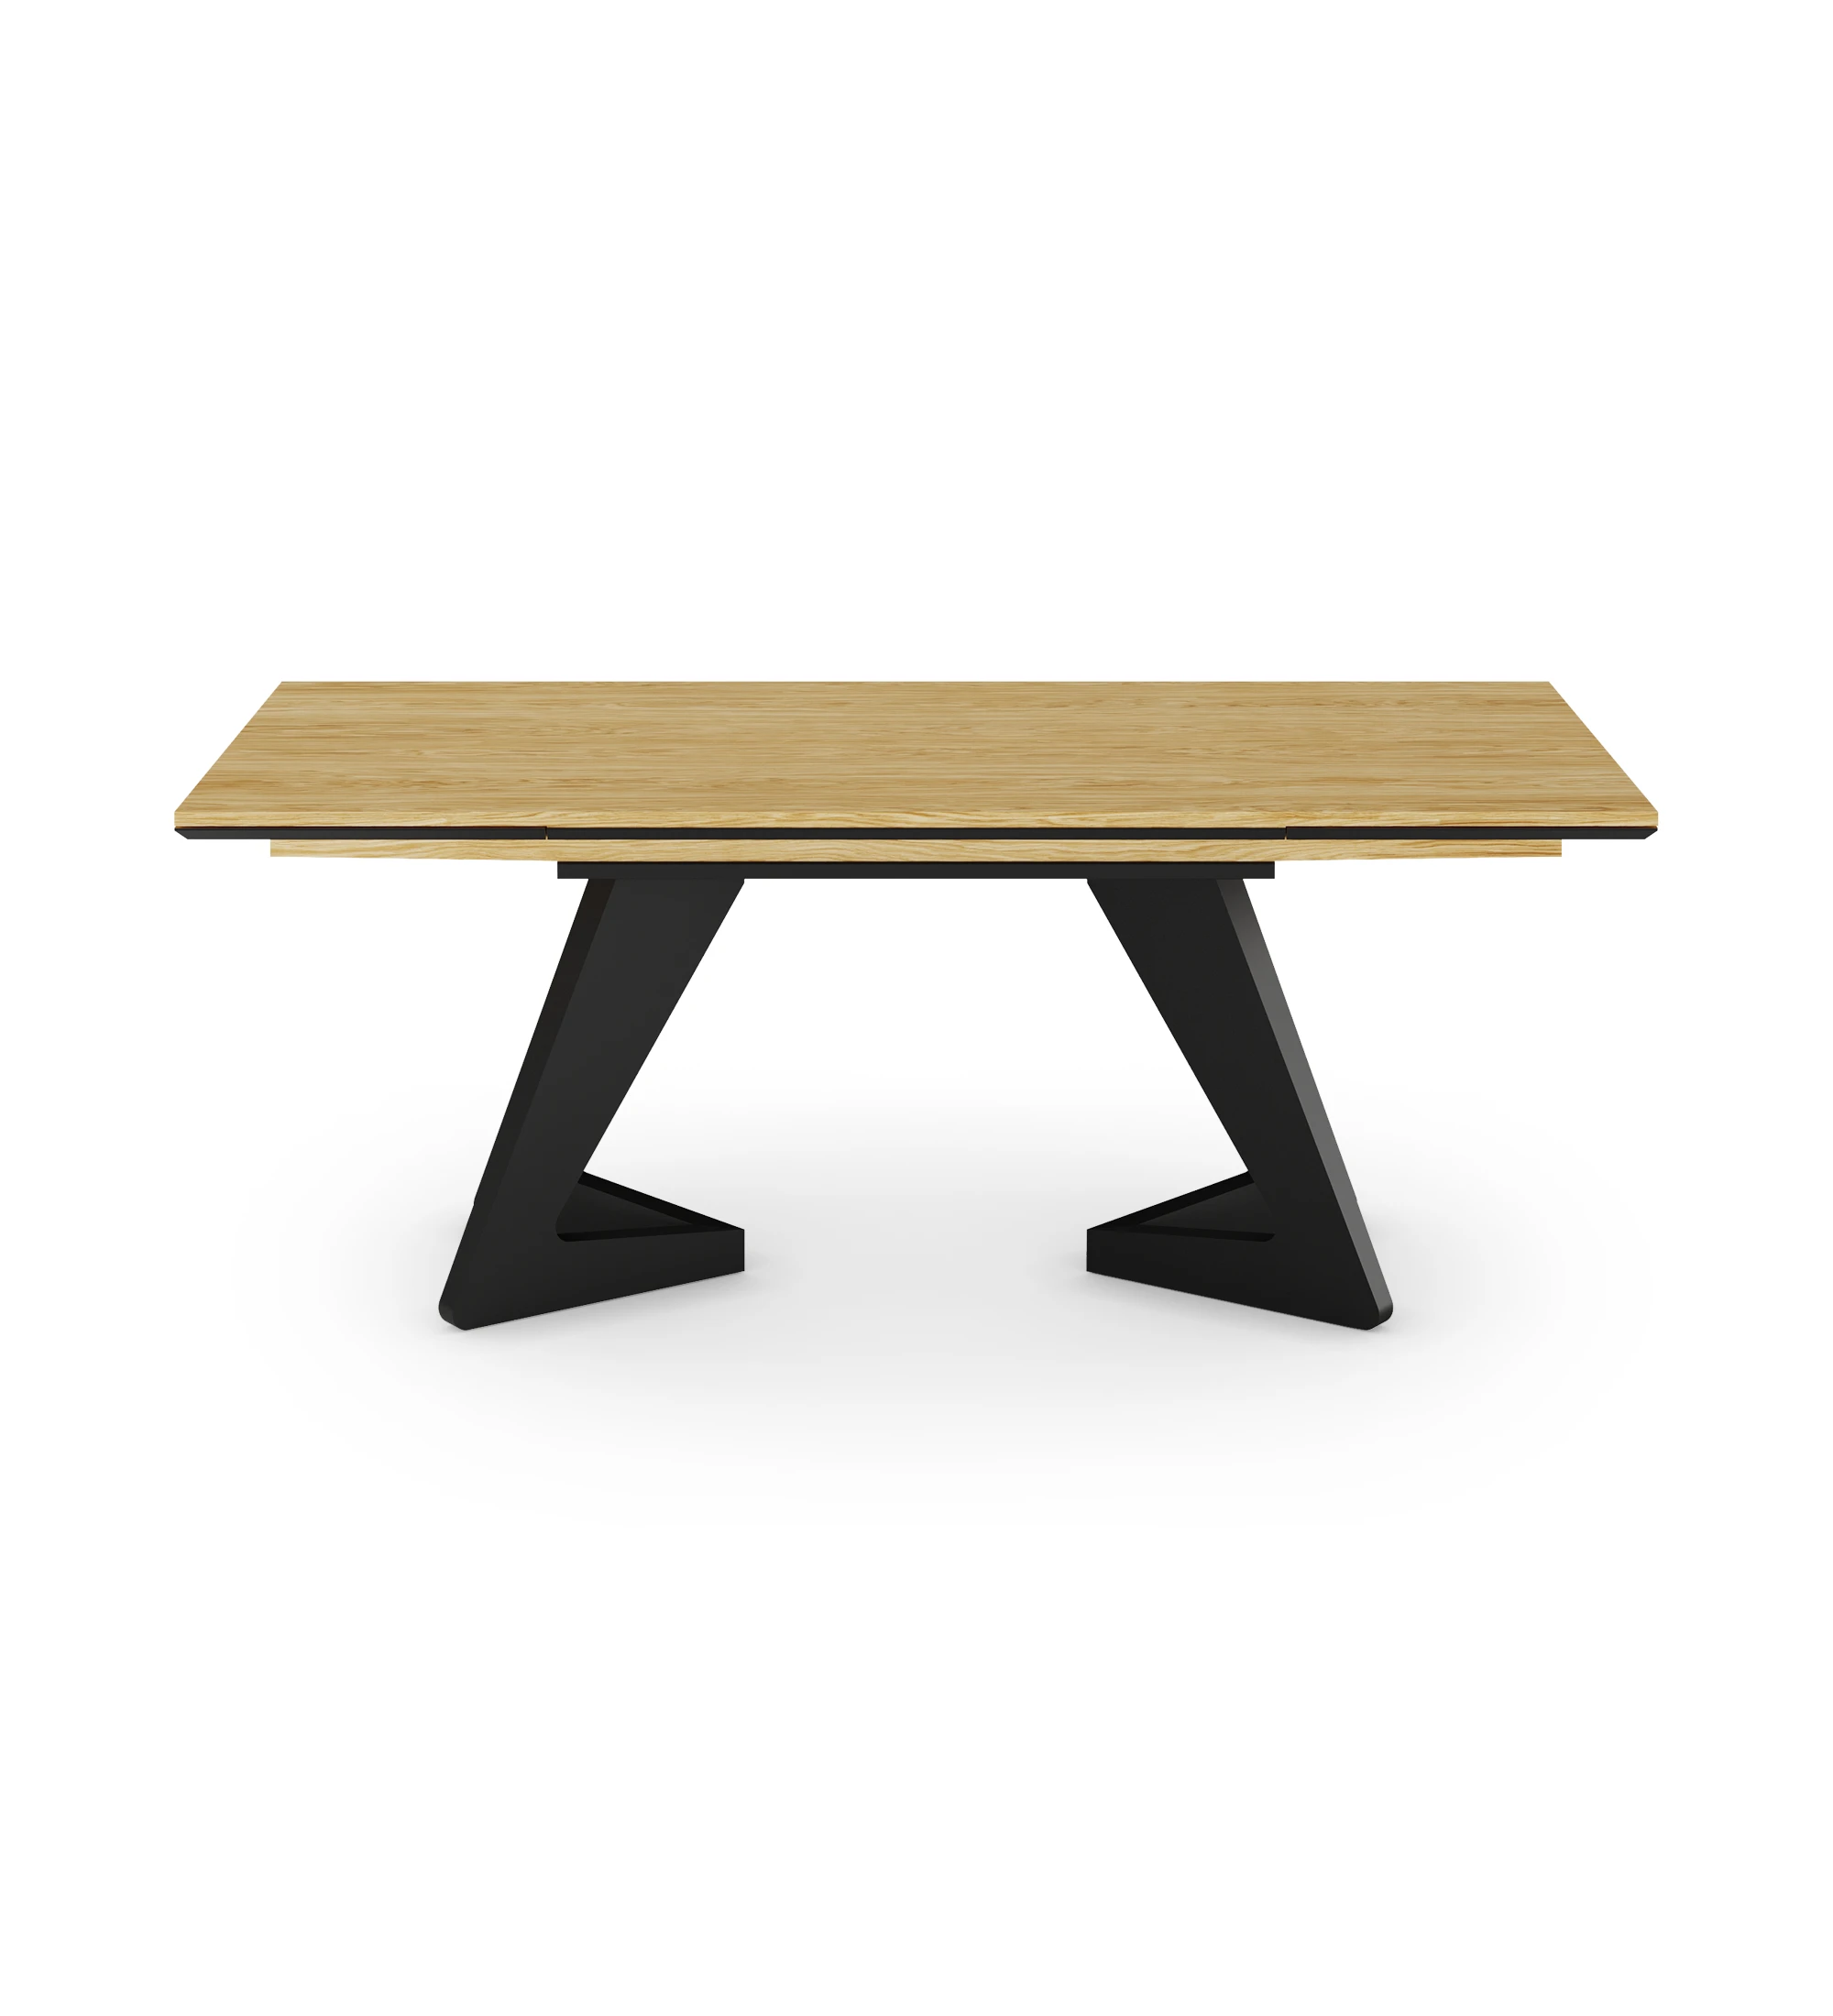 Évora extendable dining table in natural oak and black lacquered metal base.